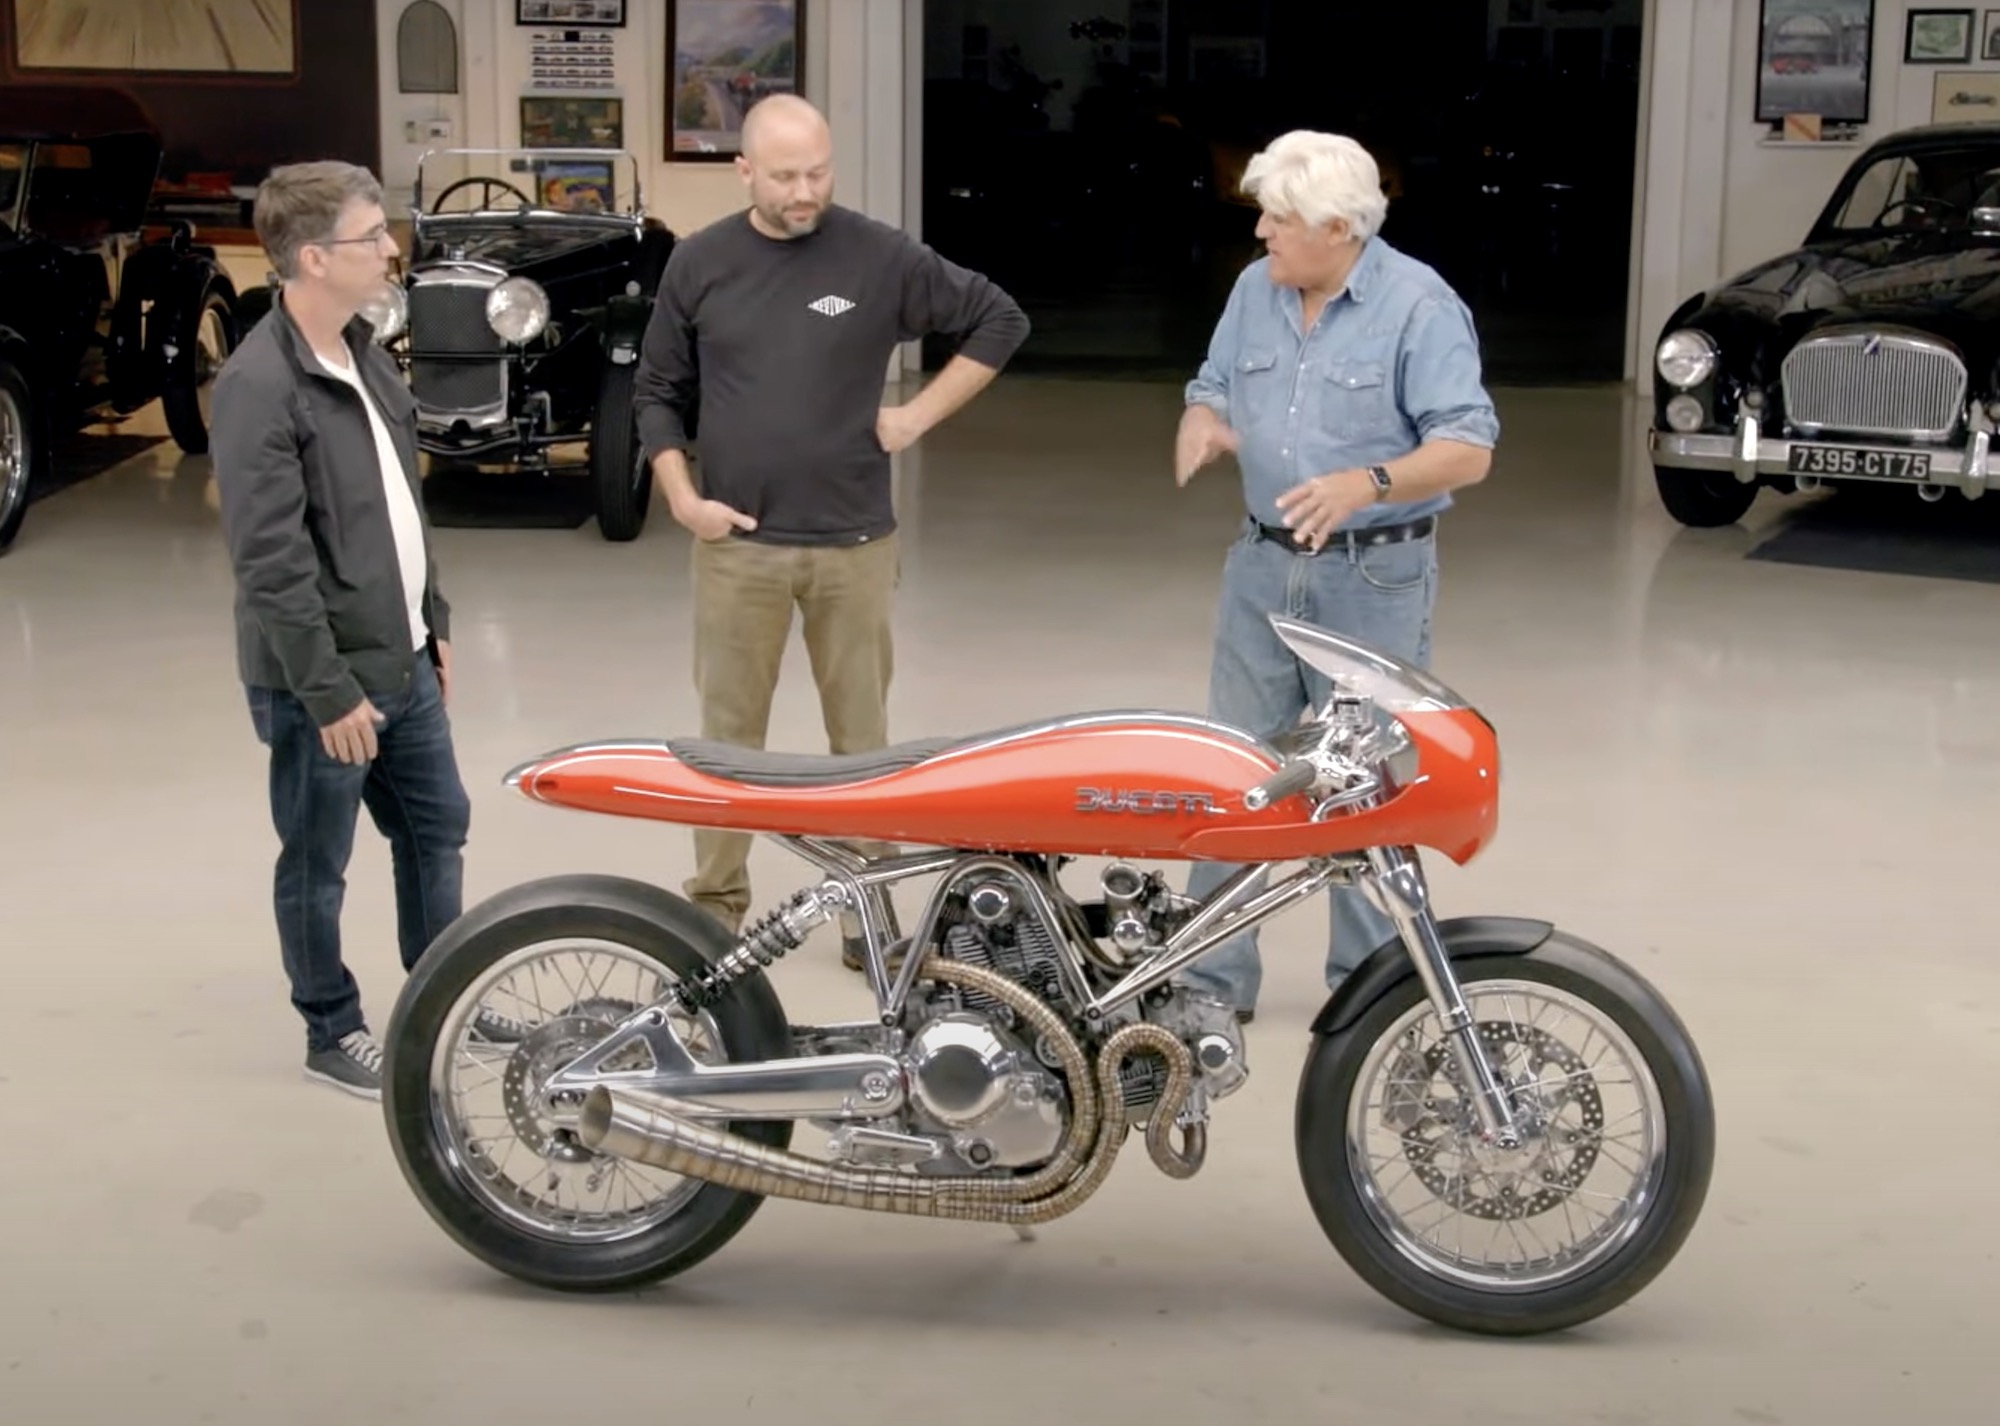 The Revival Cycles FUSE, with the bike’s creator (Alan Stulberg, founder of Revival) and owner (Edward Boyd) next to Jay Leno from 'Jay Leno's Garage.' Media sourced from Youtube.